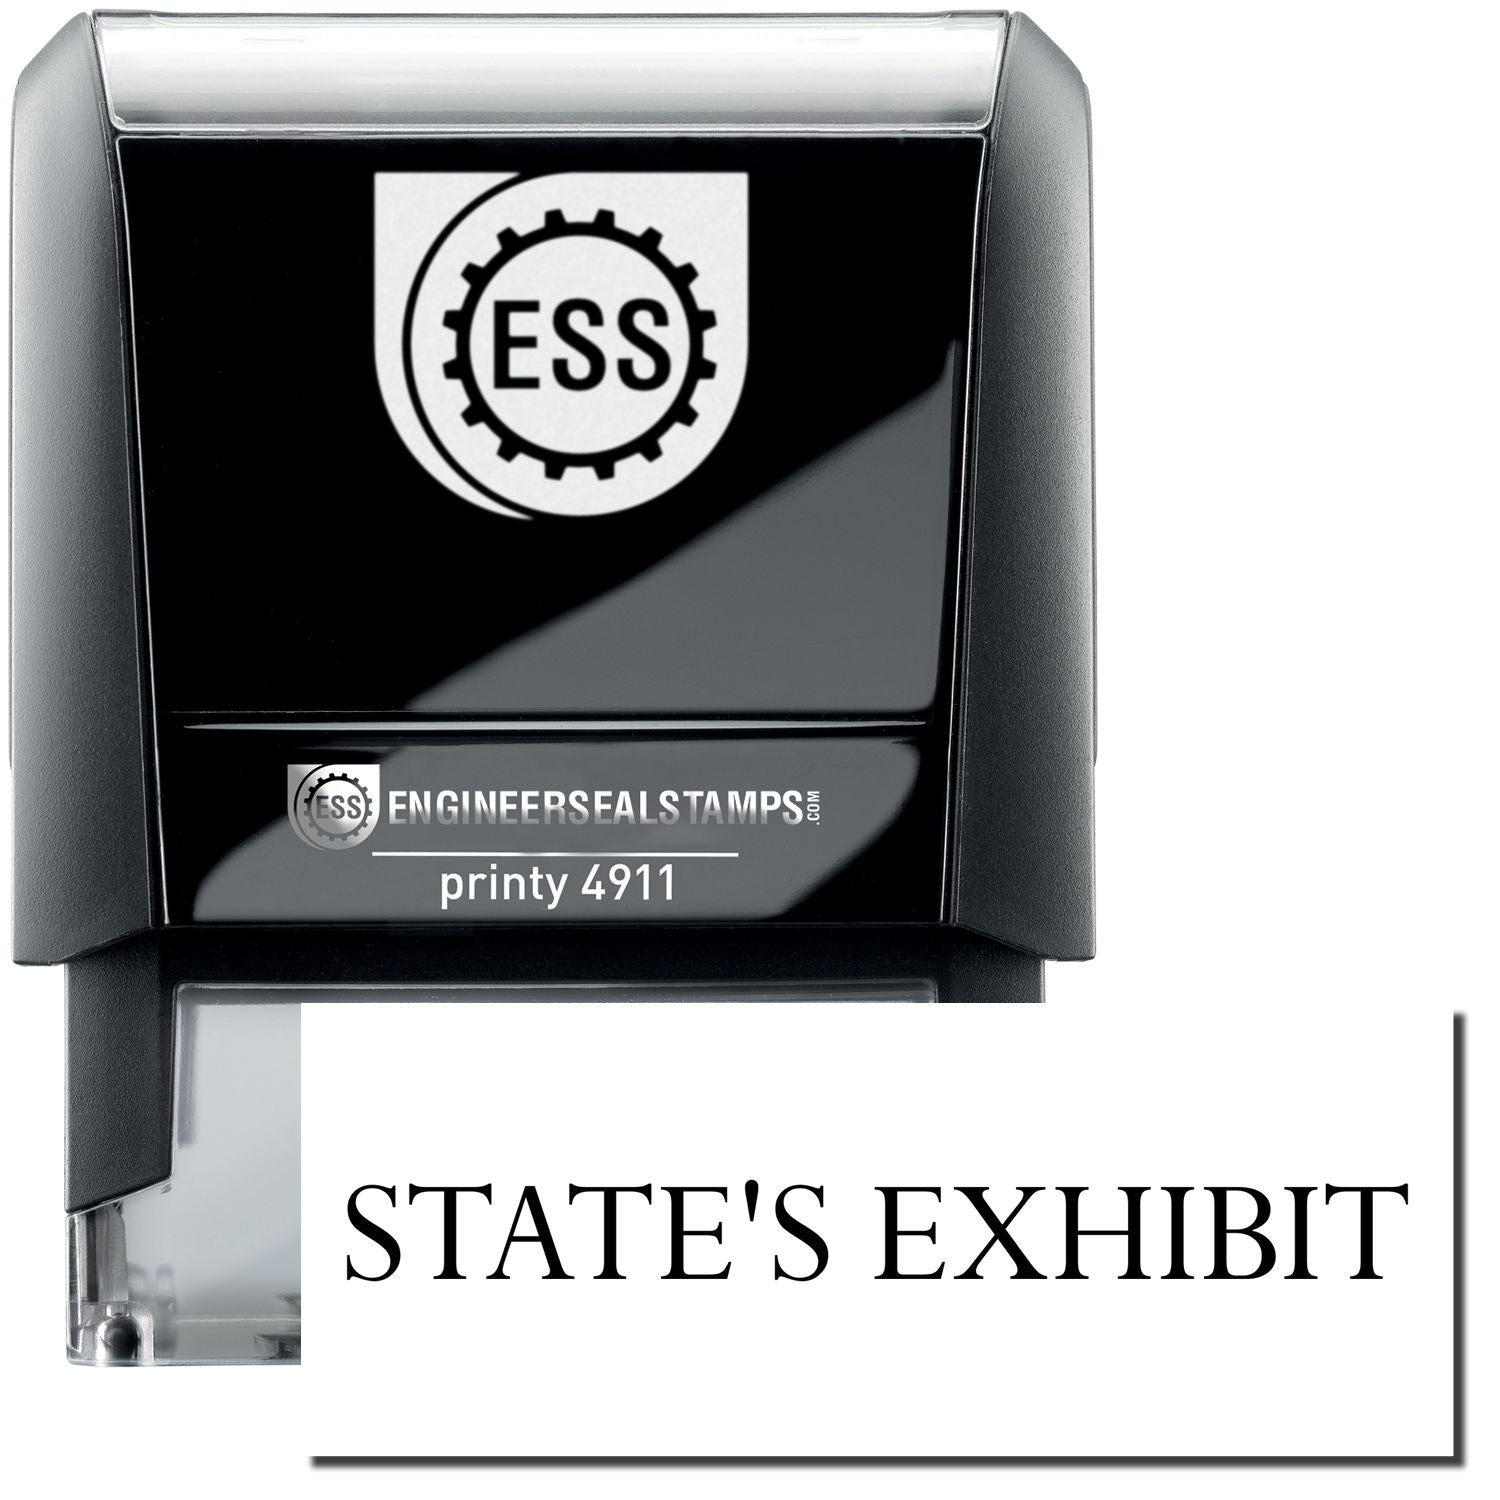 A self-inking stamp with a stamped image showing how the text "STATE'S EXHIBIT" is displayed after stamping.